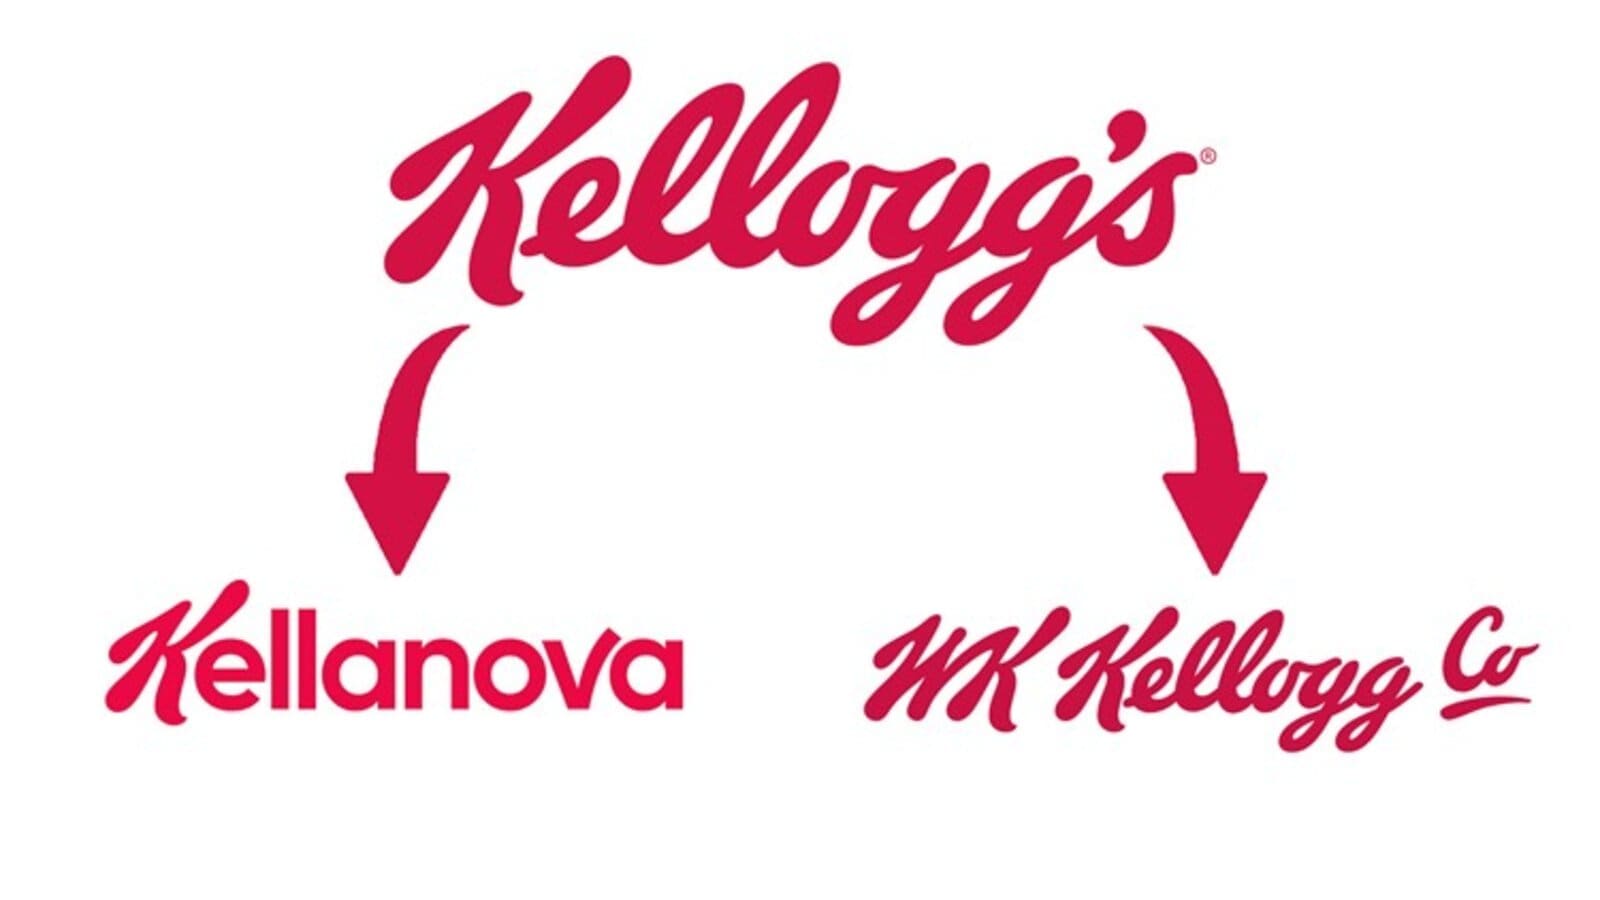 Kellogg’s formally approved to trade as two companies Kellanova and WK ...